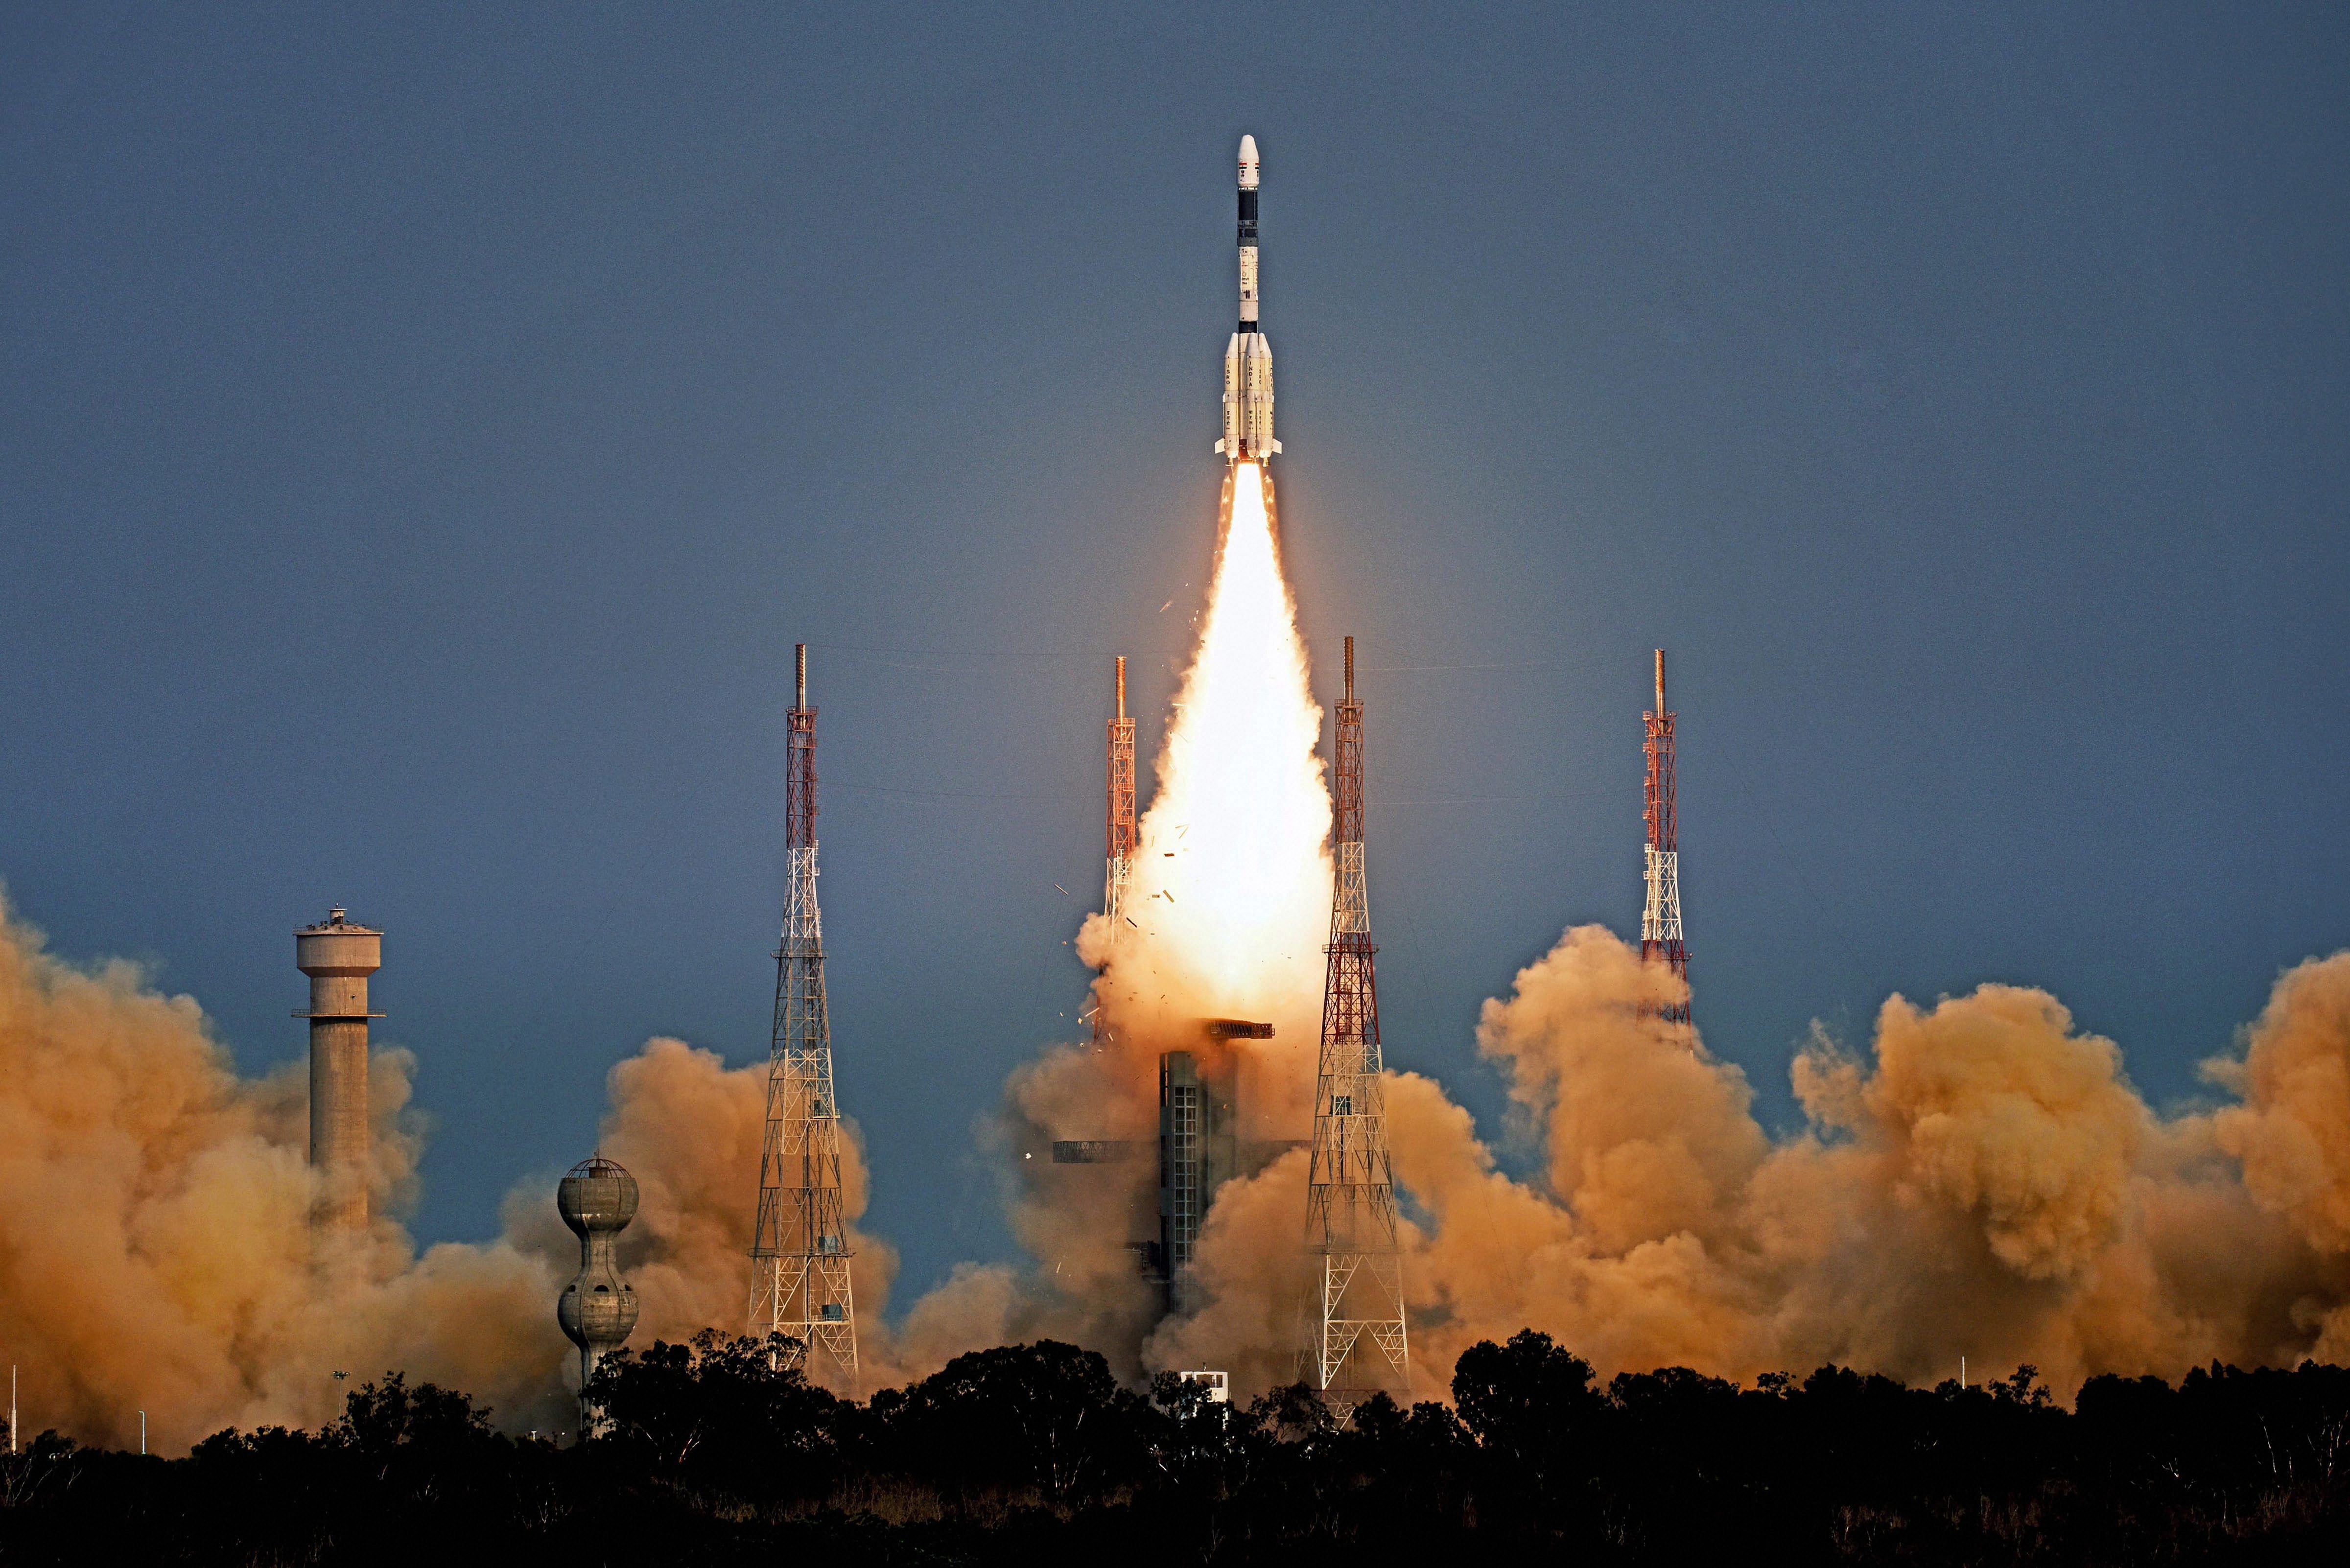 GSAT 6A was launched in March last year and was meant to support military communications in hostile regions (PTI File Photo)